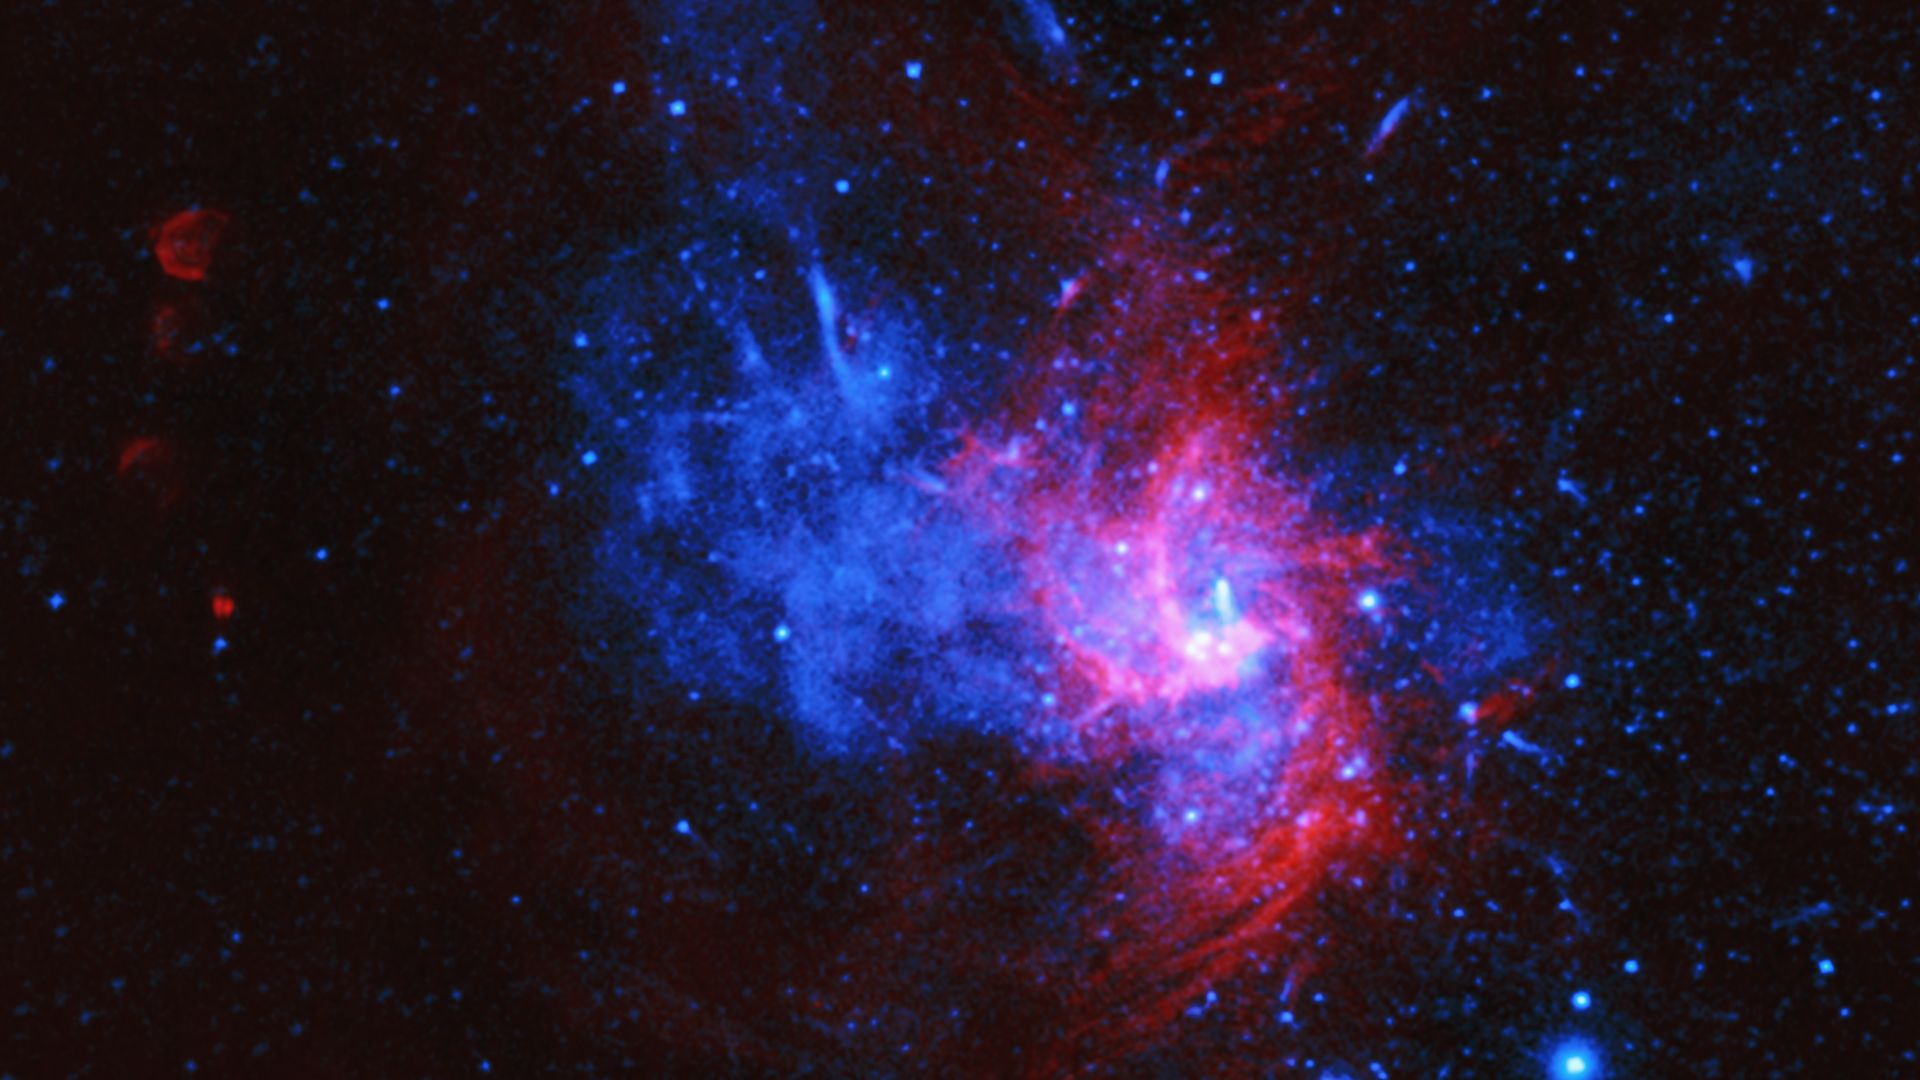 A rare type of star explosion seen in blue and pink